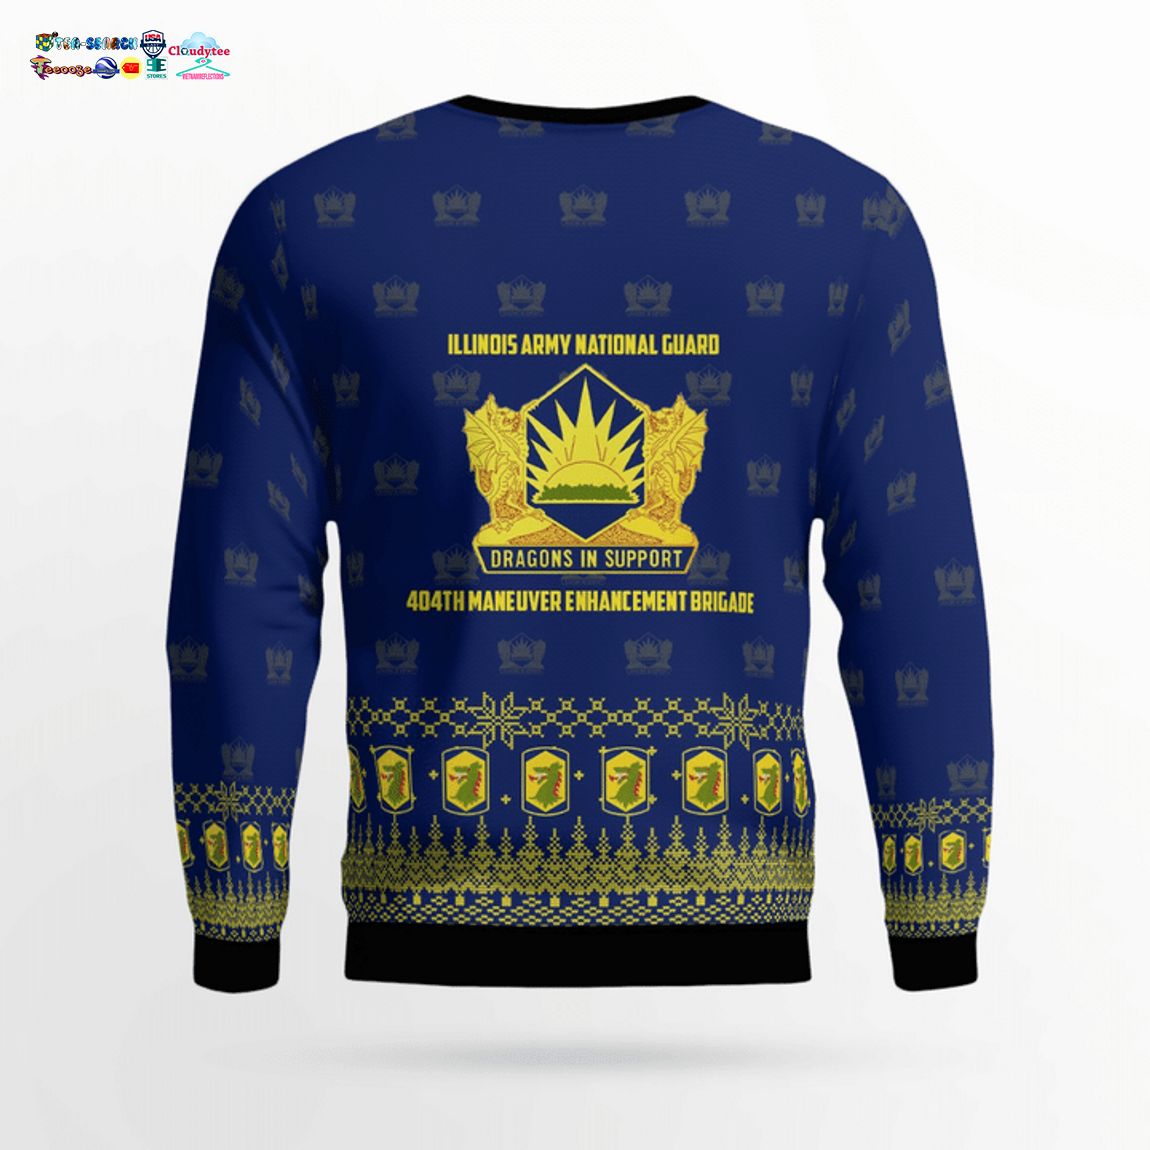 404th Maneuver Enhancement Brigade Of Illinois Army National Guard Ver 2 3D Christmas Sweater